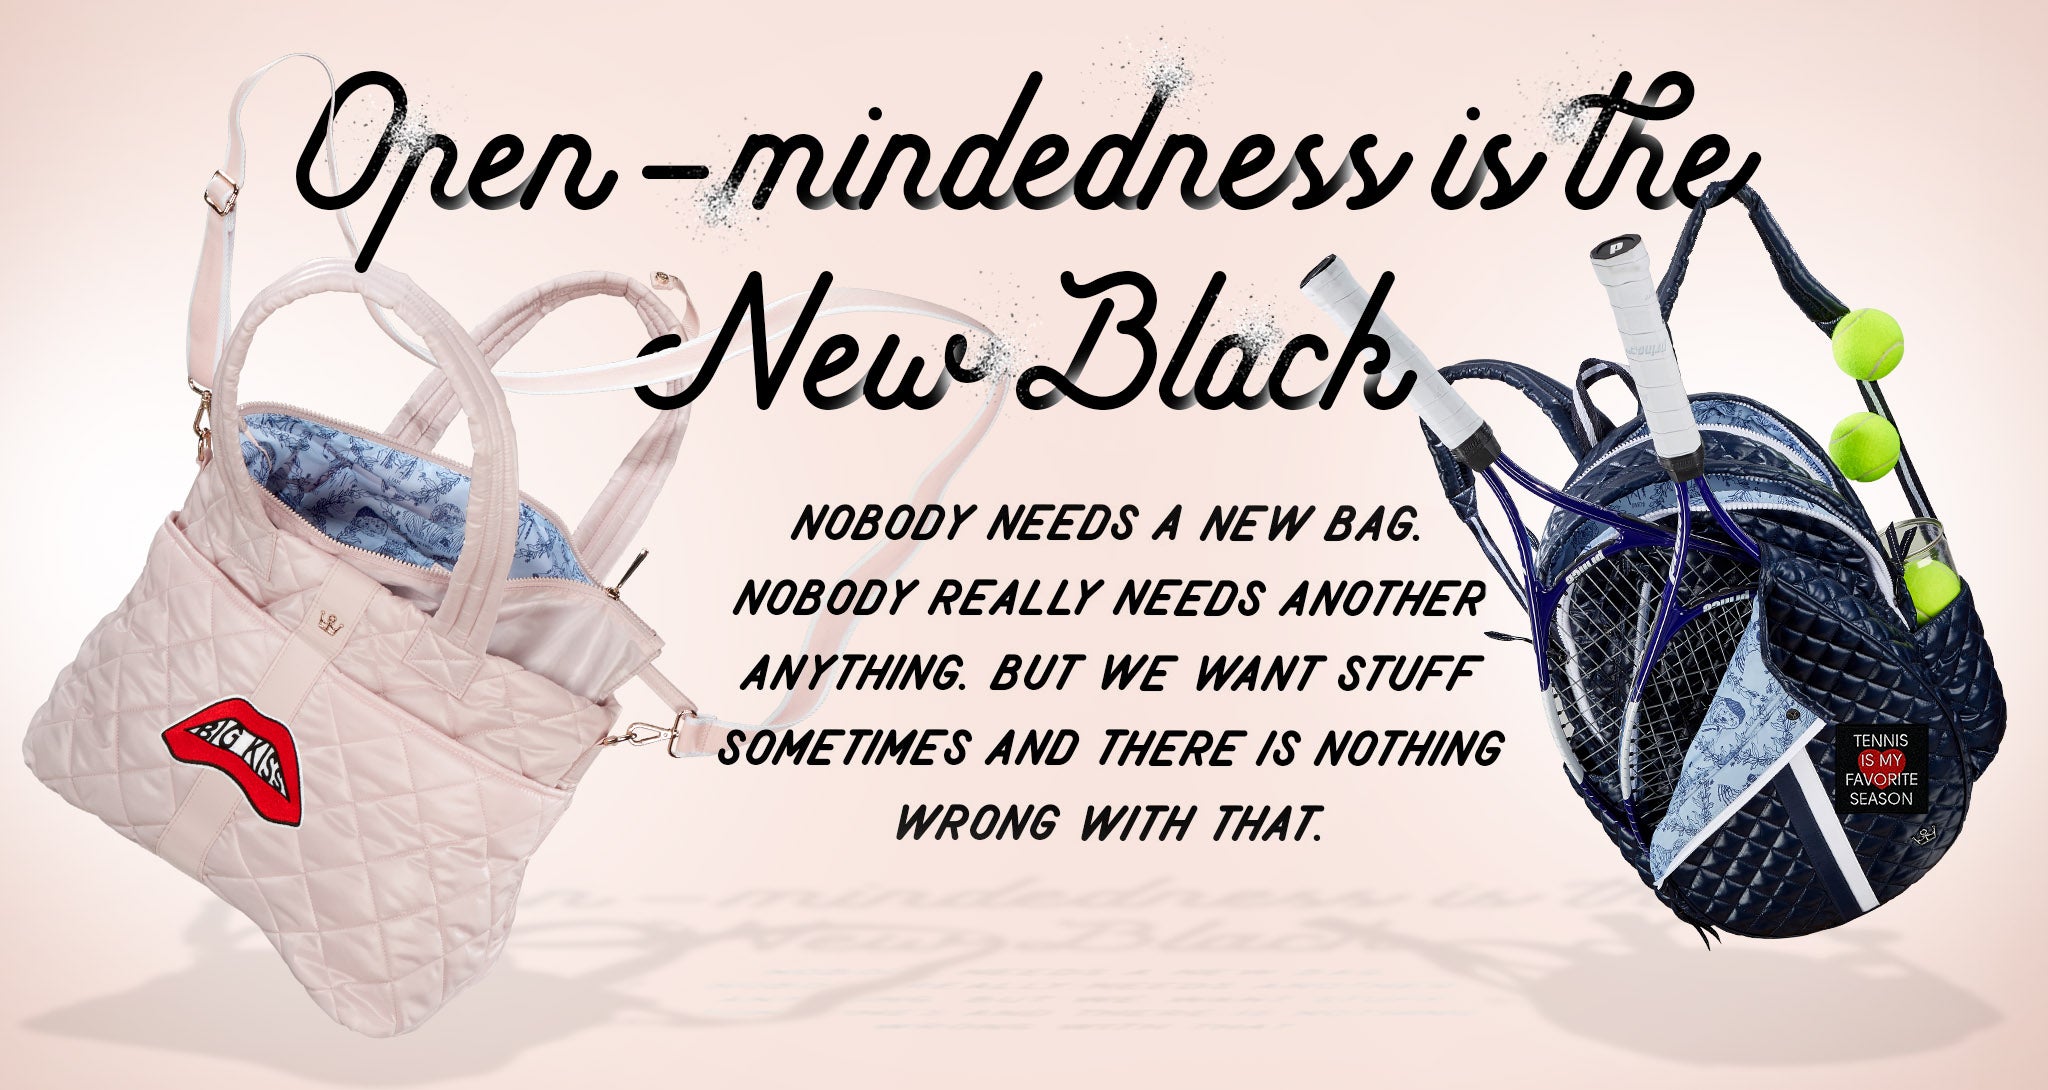 Open-mindedness is the New Black